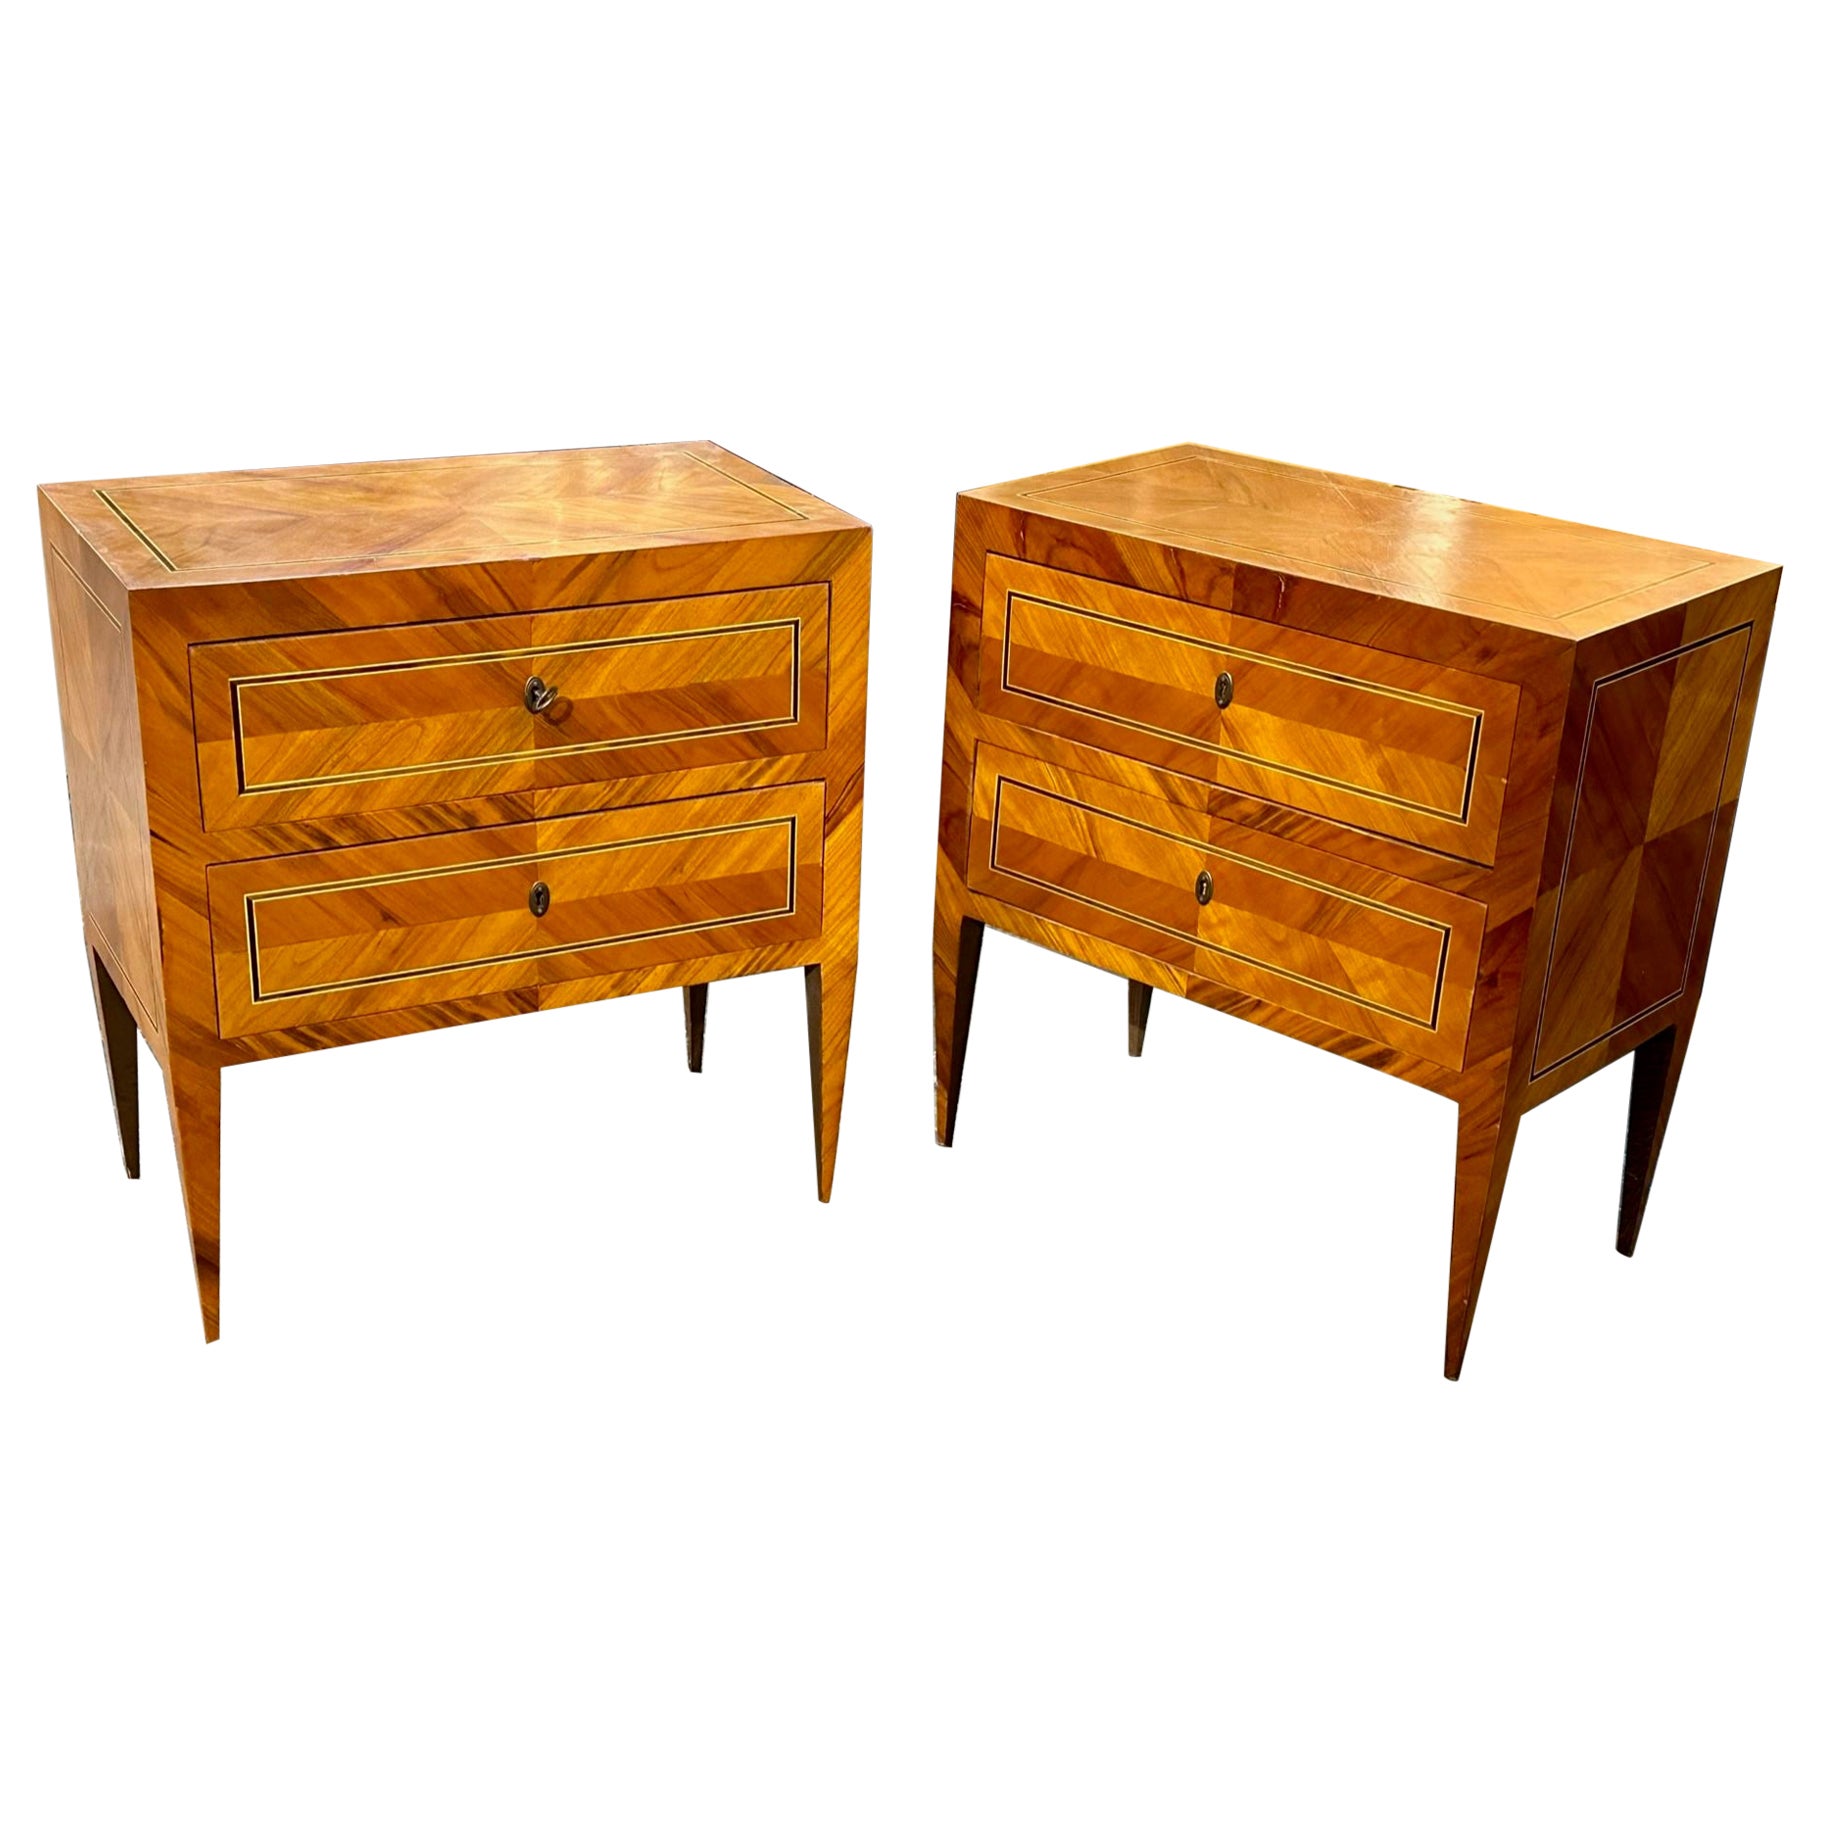 Pair of Neo-Classical Inlaid Walnut Side Tables